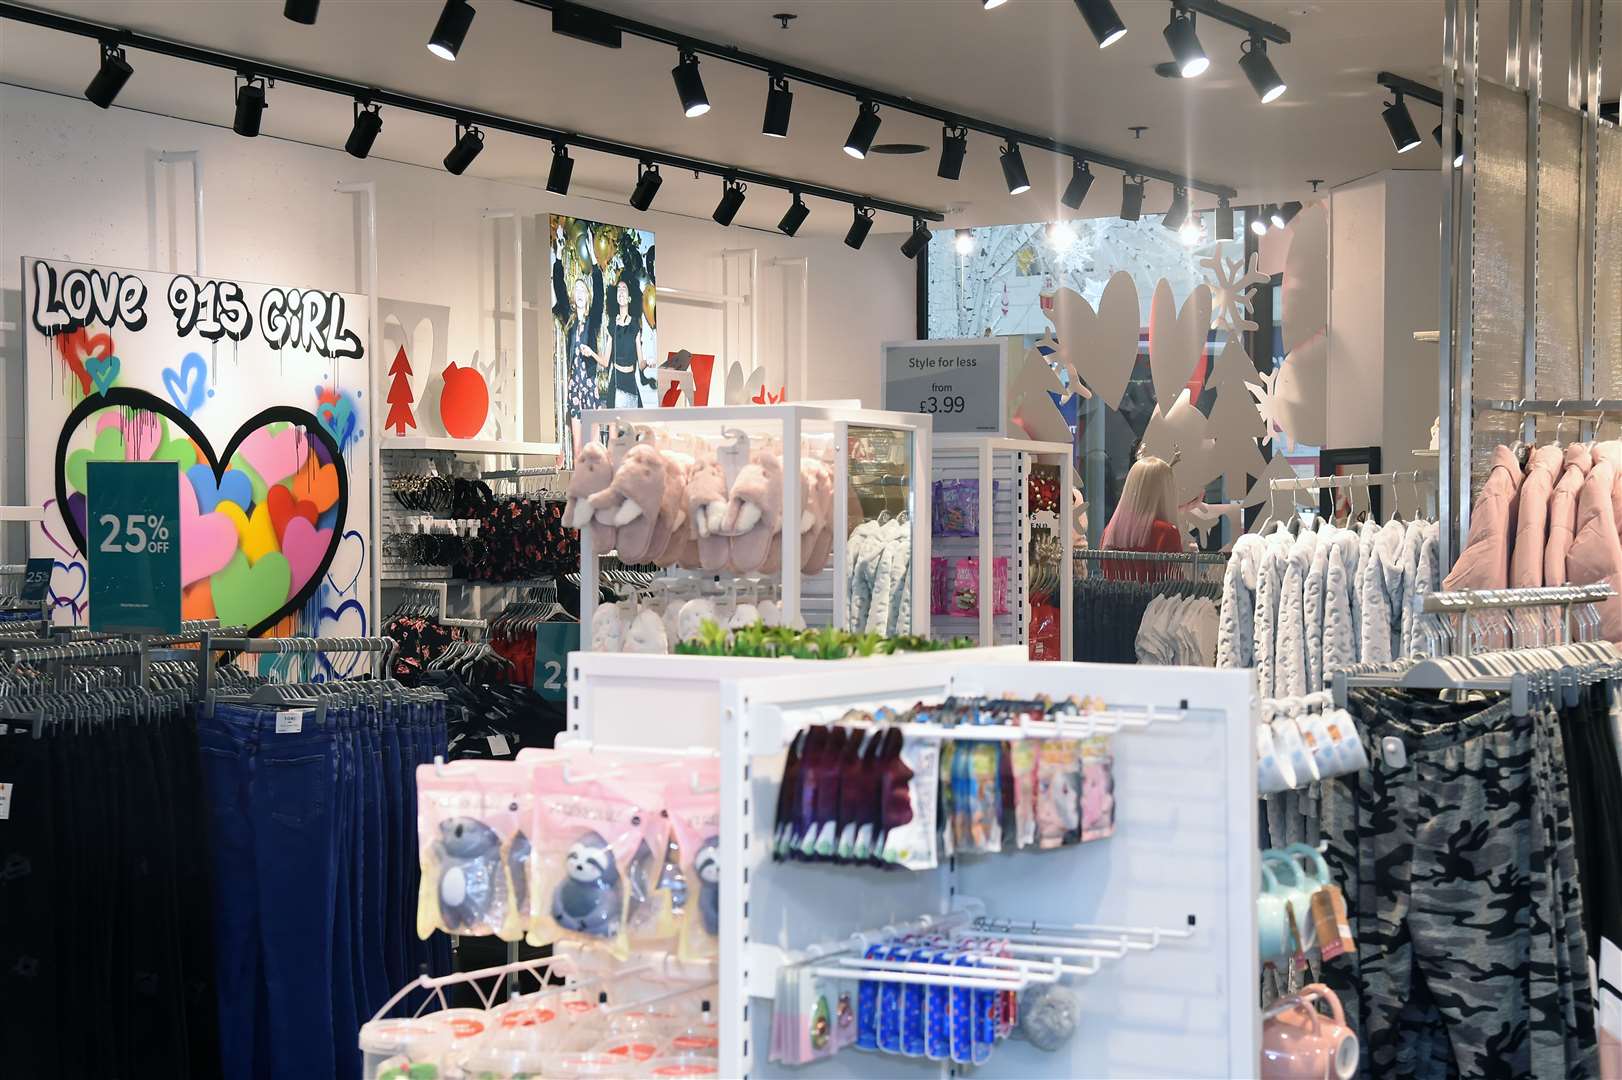 The store is aimed at girls aged nine to 15